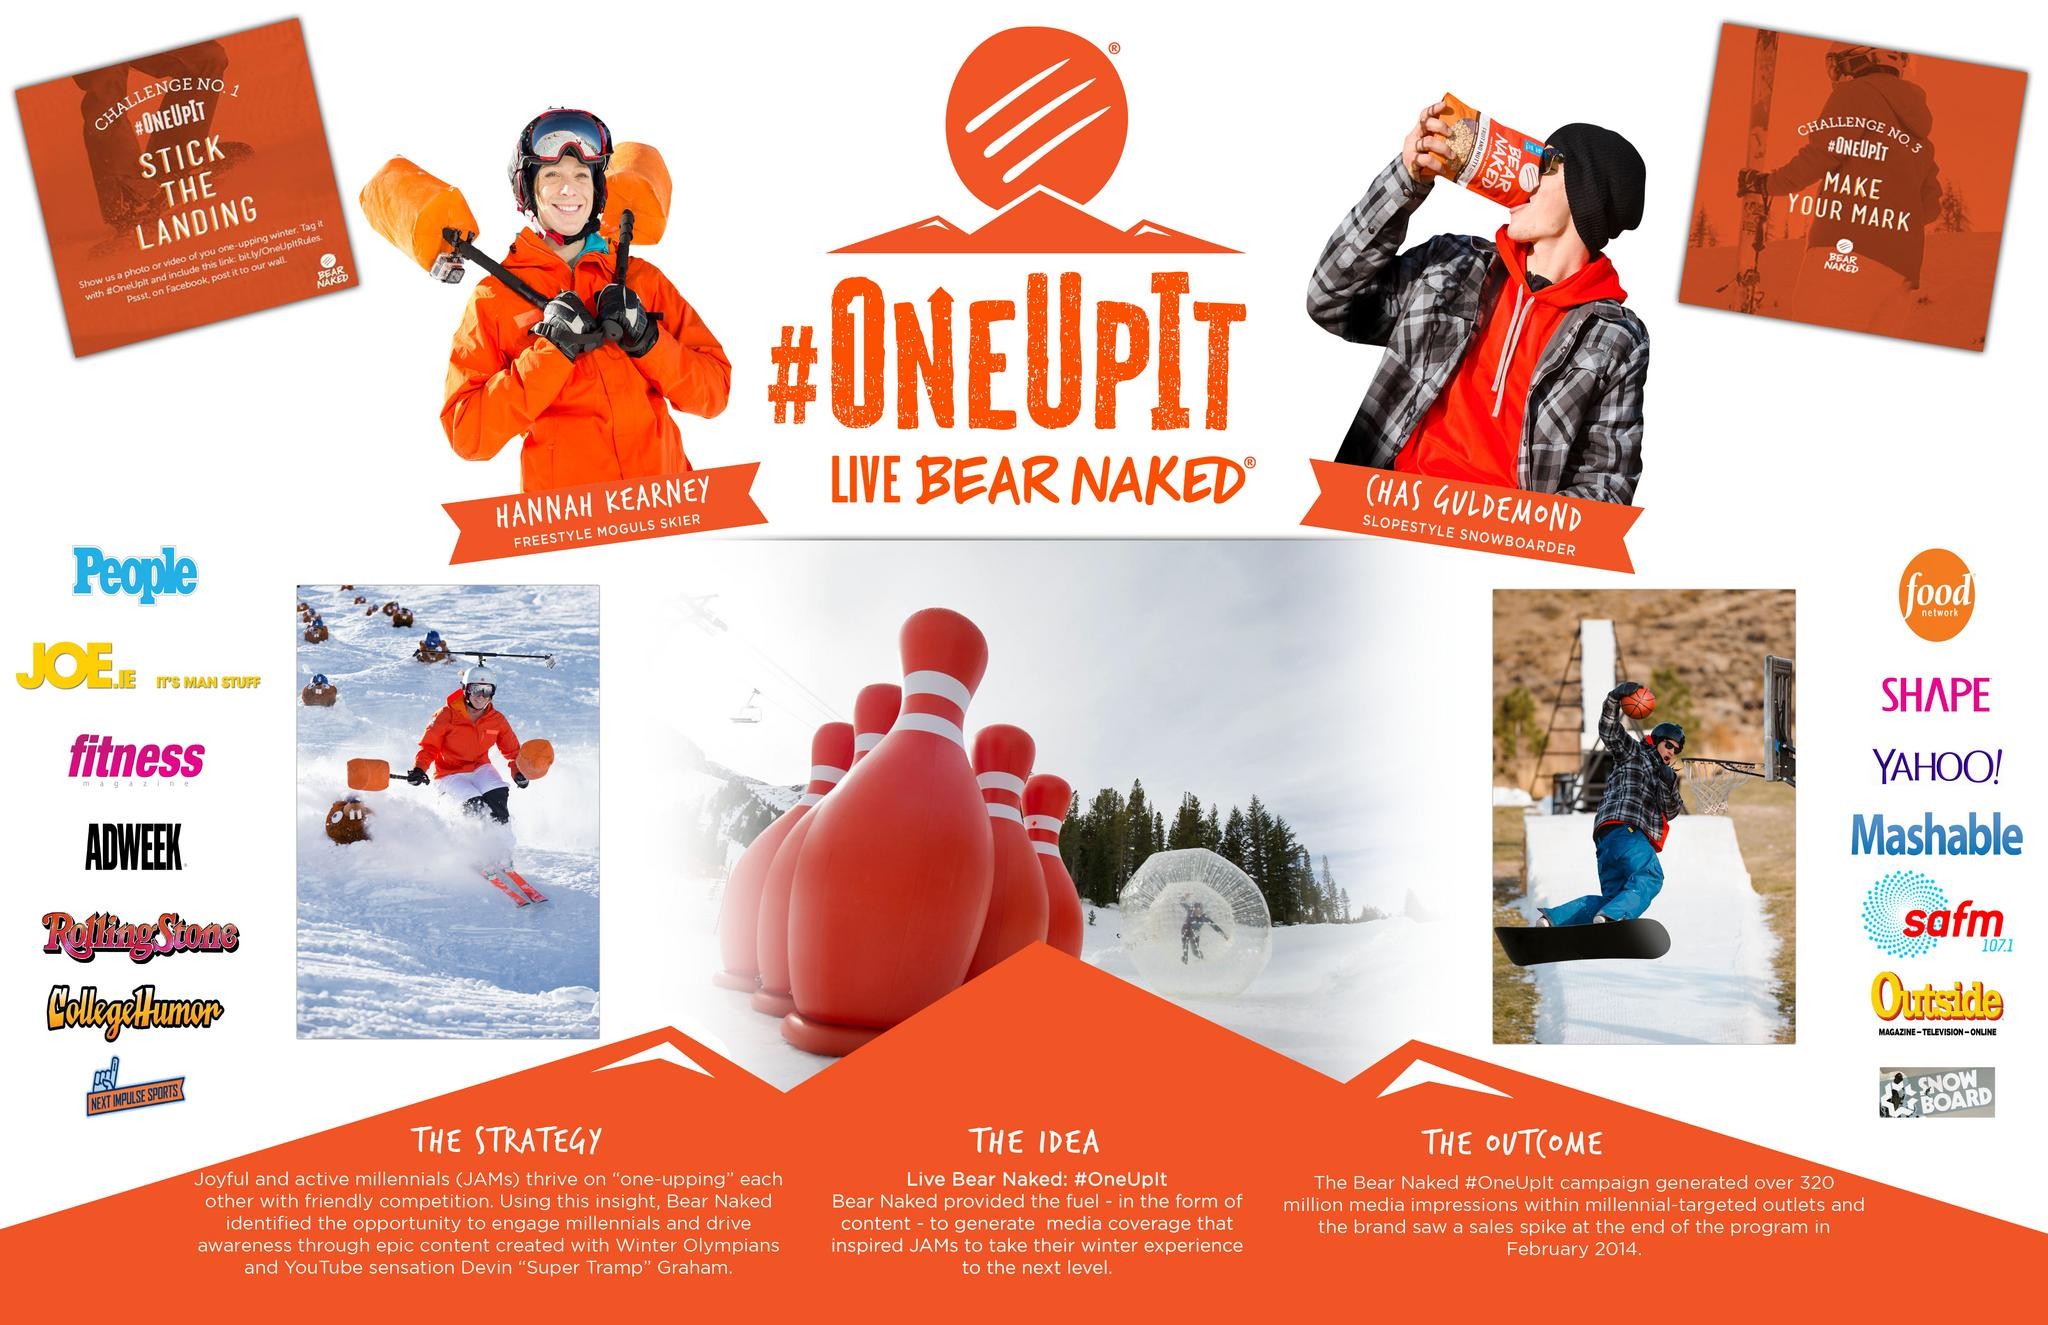 #ONEUPIT CAMPAIGN